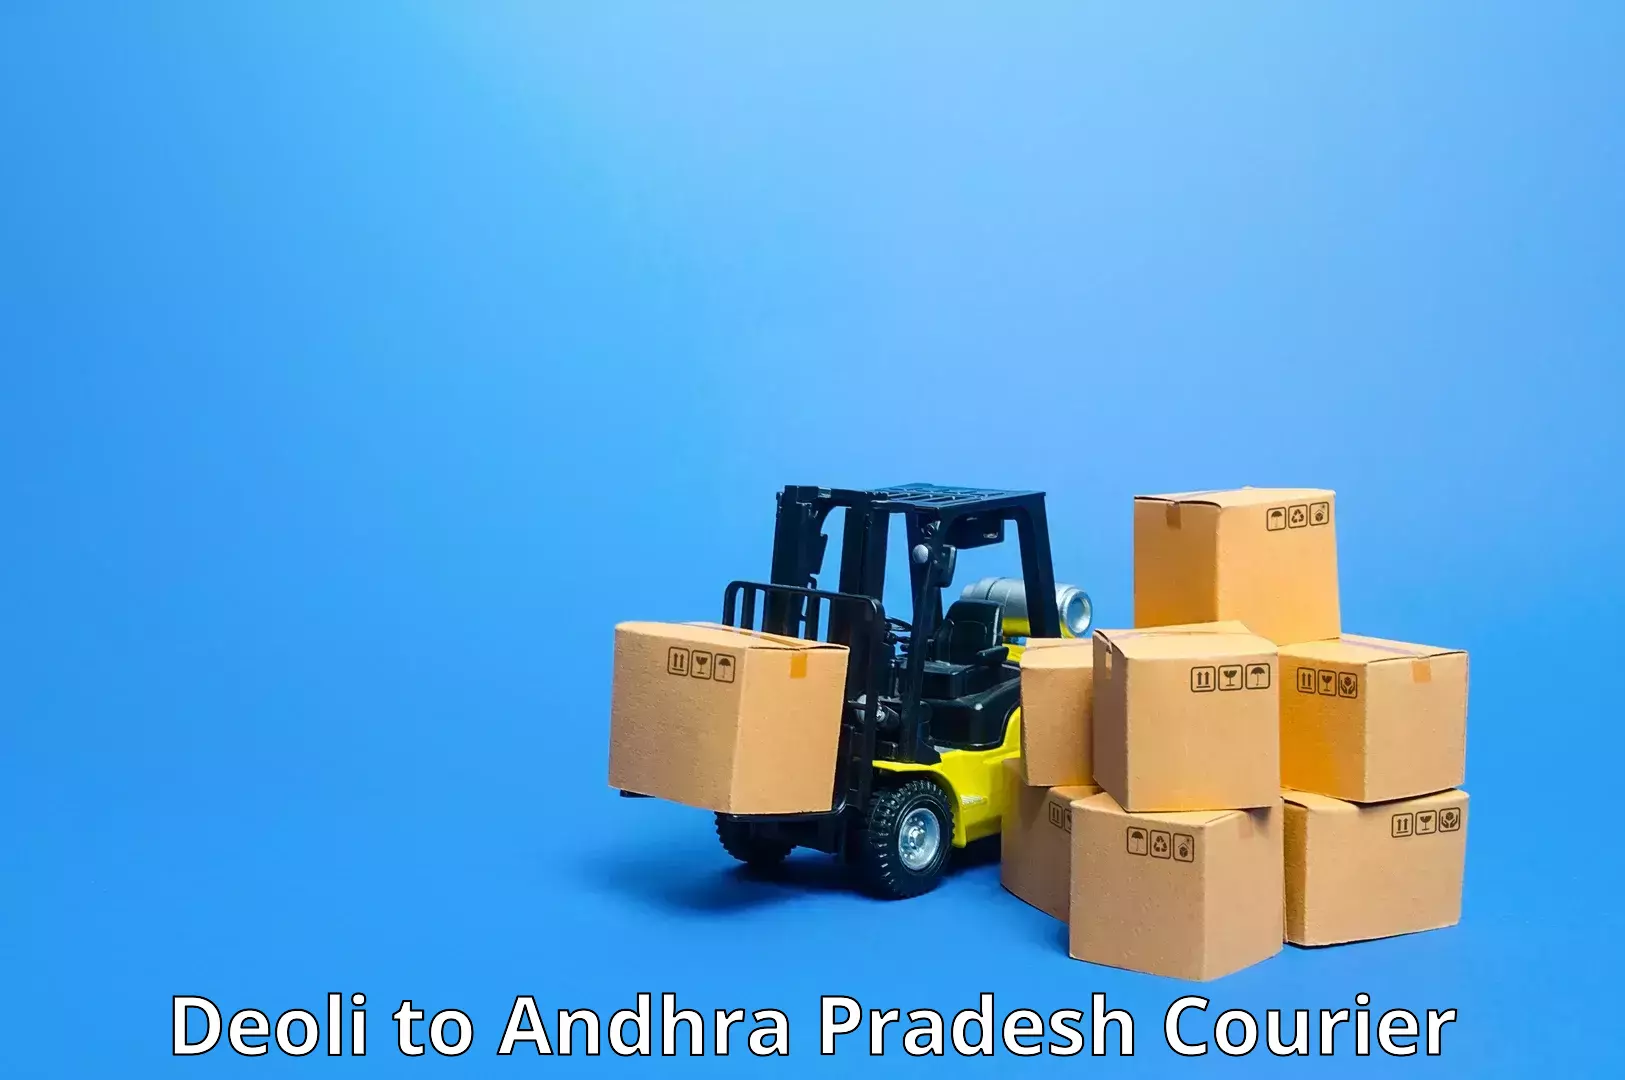 Efficient courier operations Deoli to Gollaprollu